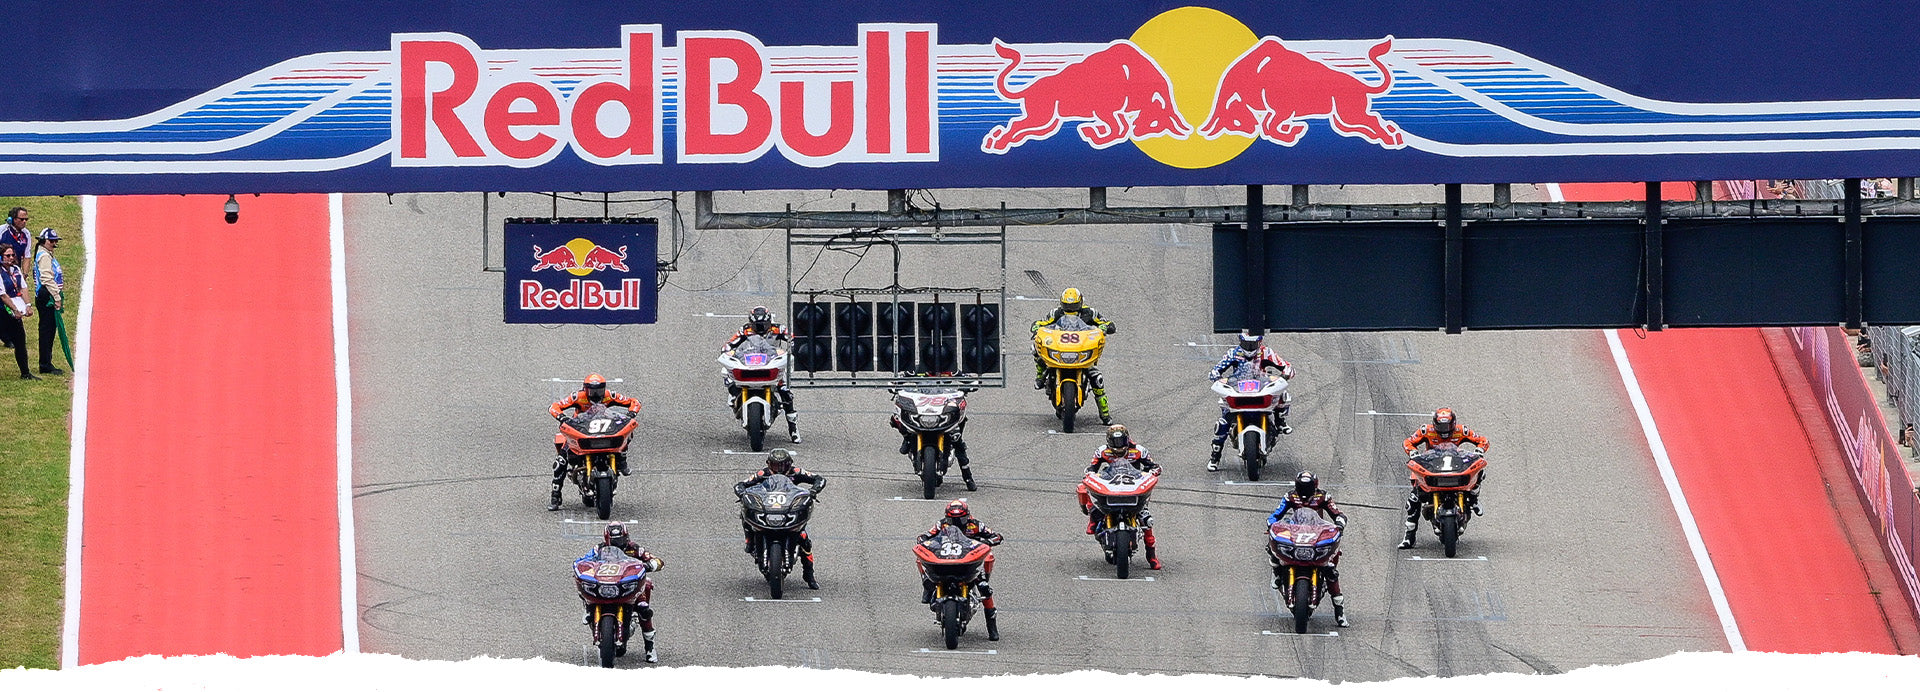 A thrilling start at the MotoGP RedBull Grand Prix of the Americas in Austin, Texas, with a lineup of motorcycle racers speeding off under the massive Red Bull logo arch. The racers, in a mix of vibrant liveries, are captured just as they launch from the grid, with the track bordered by striking red and blue boundaries, capturing the excitement and competitive spirit of the race.